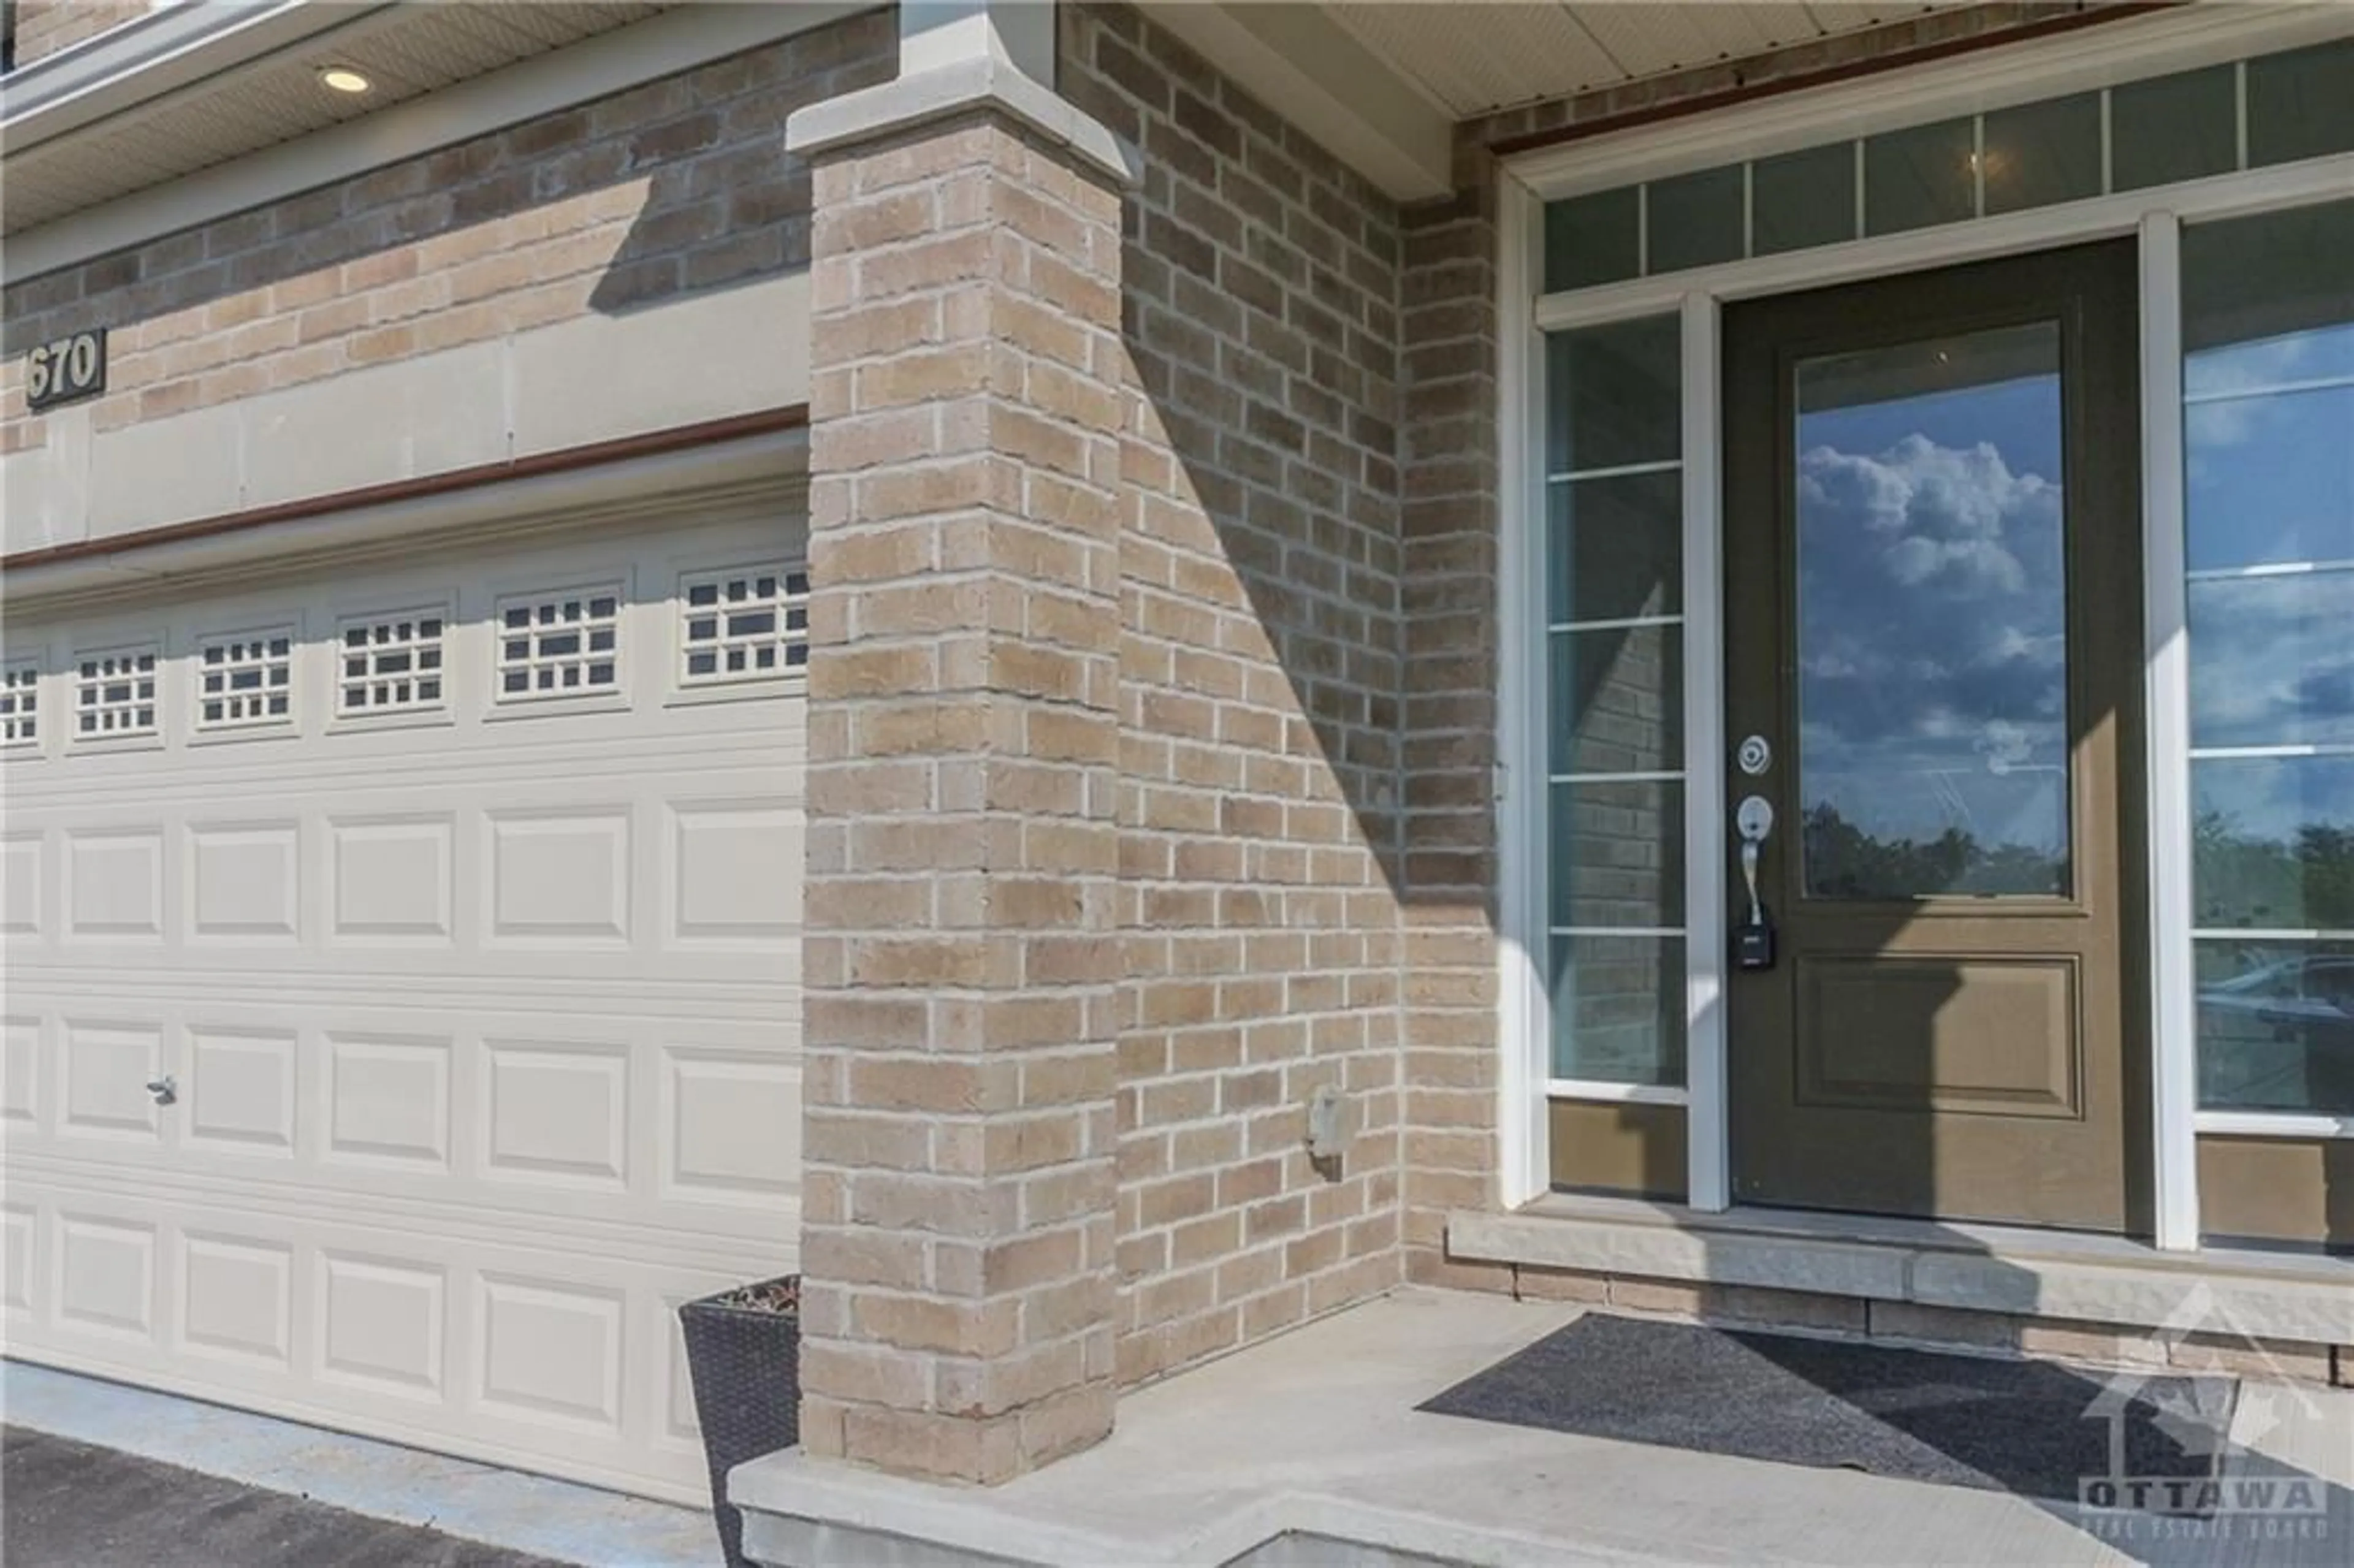 Home with brick exterior material for 670 DECOEUR Dr, Orleans Ontario K4A 1G4